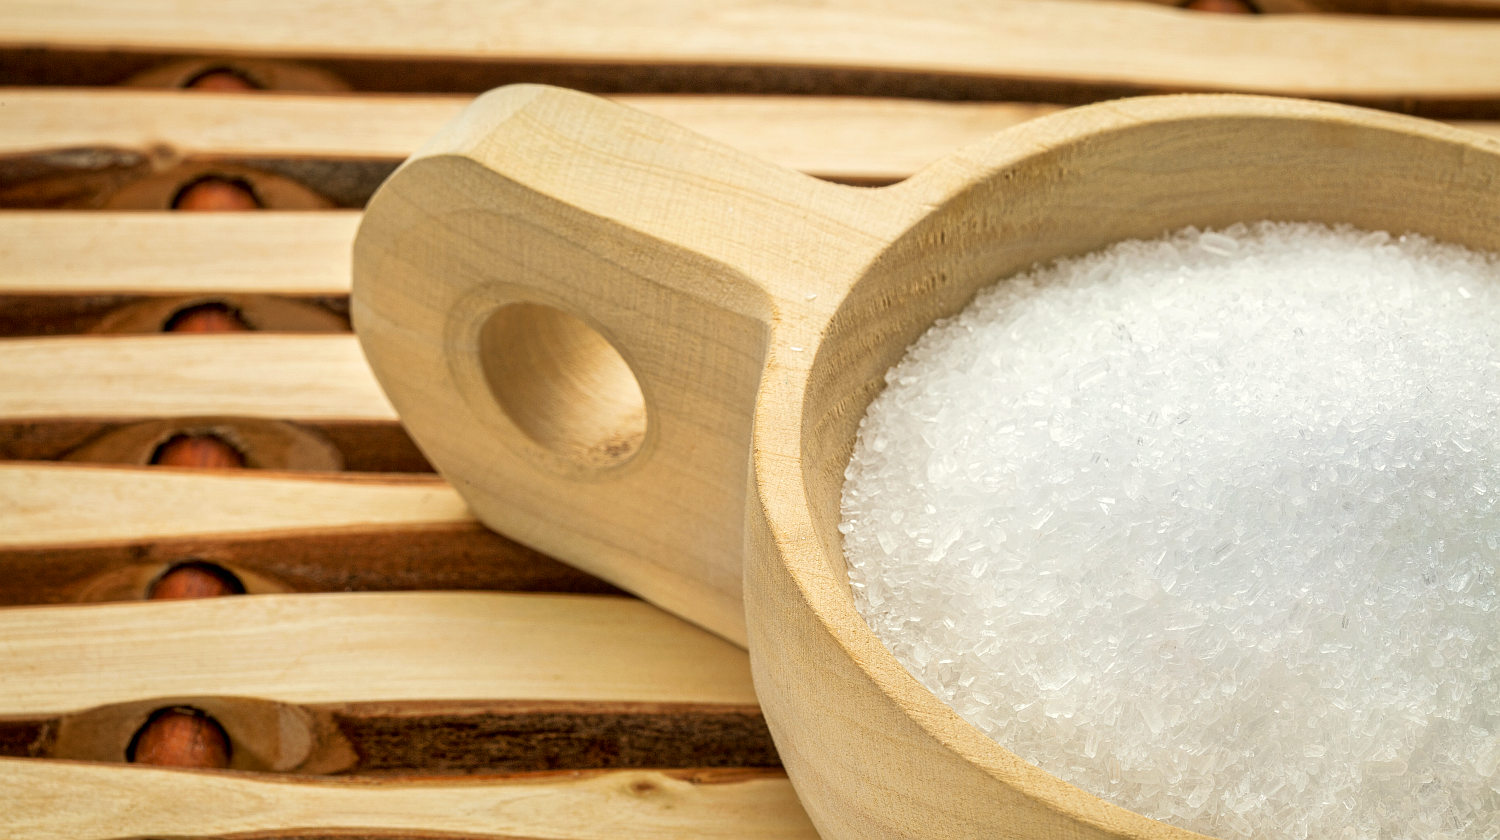 From stress to insomnia: 6 Amazing health benefits of Epsom salt you should know